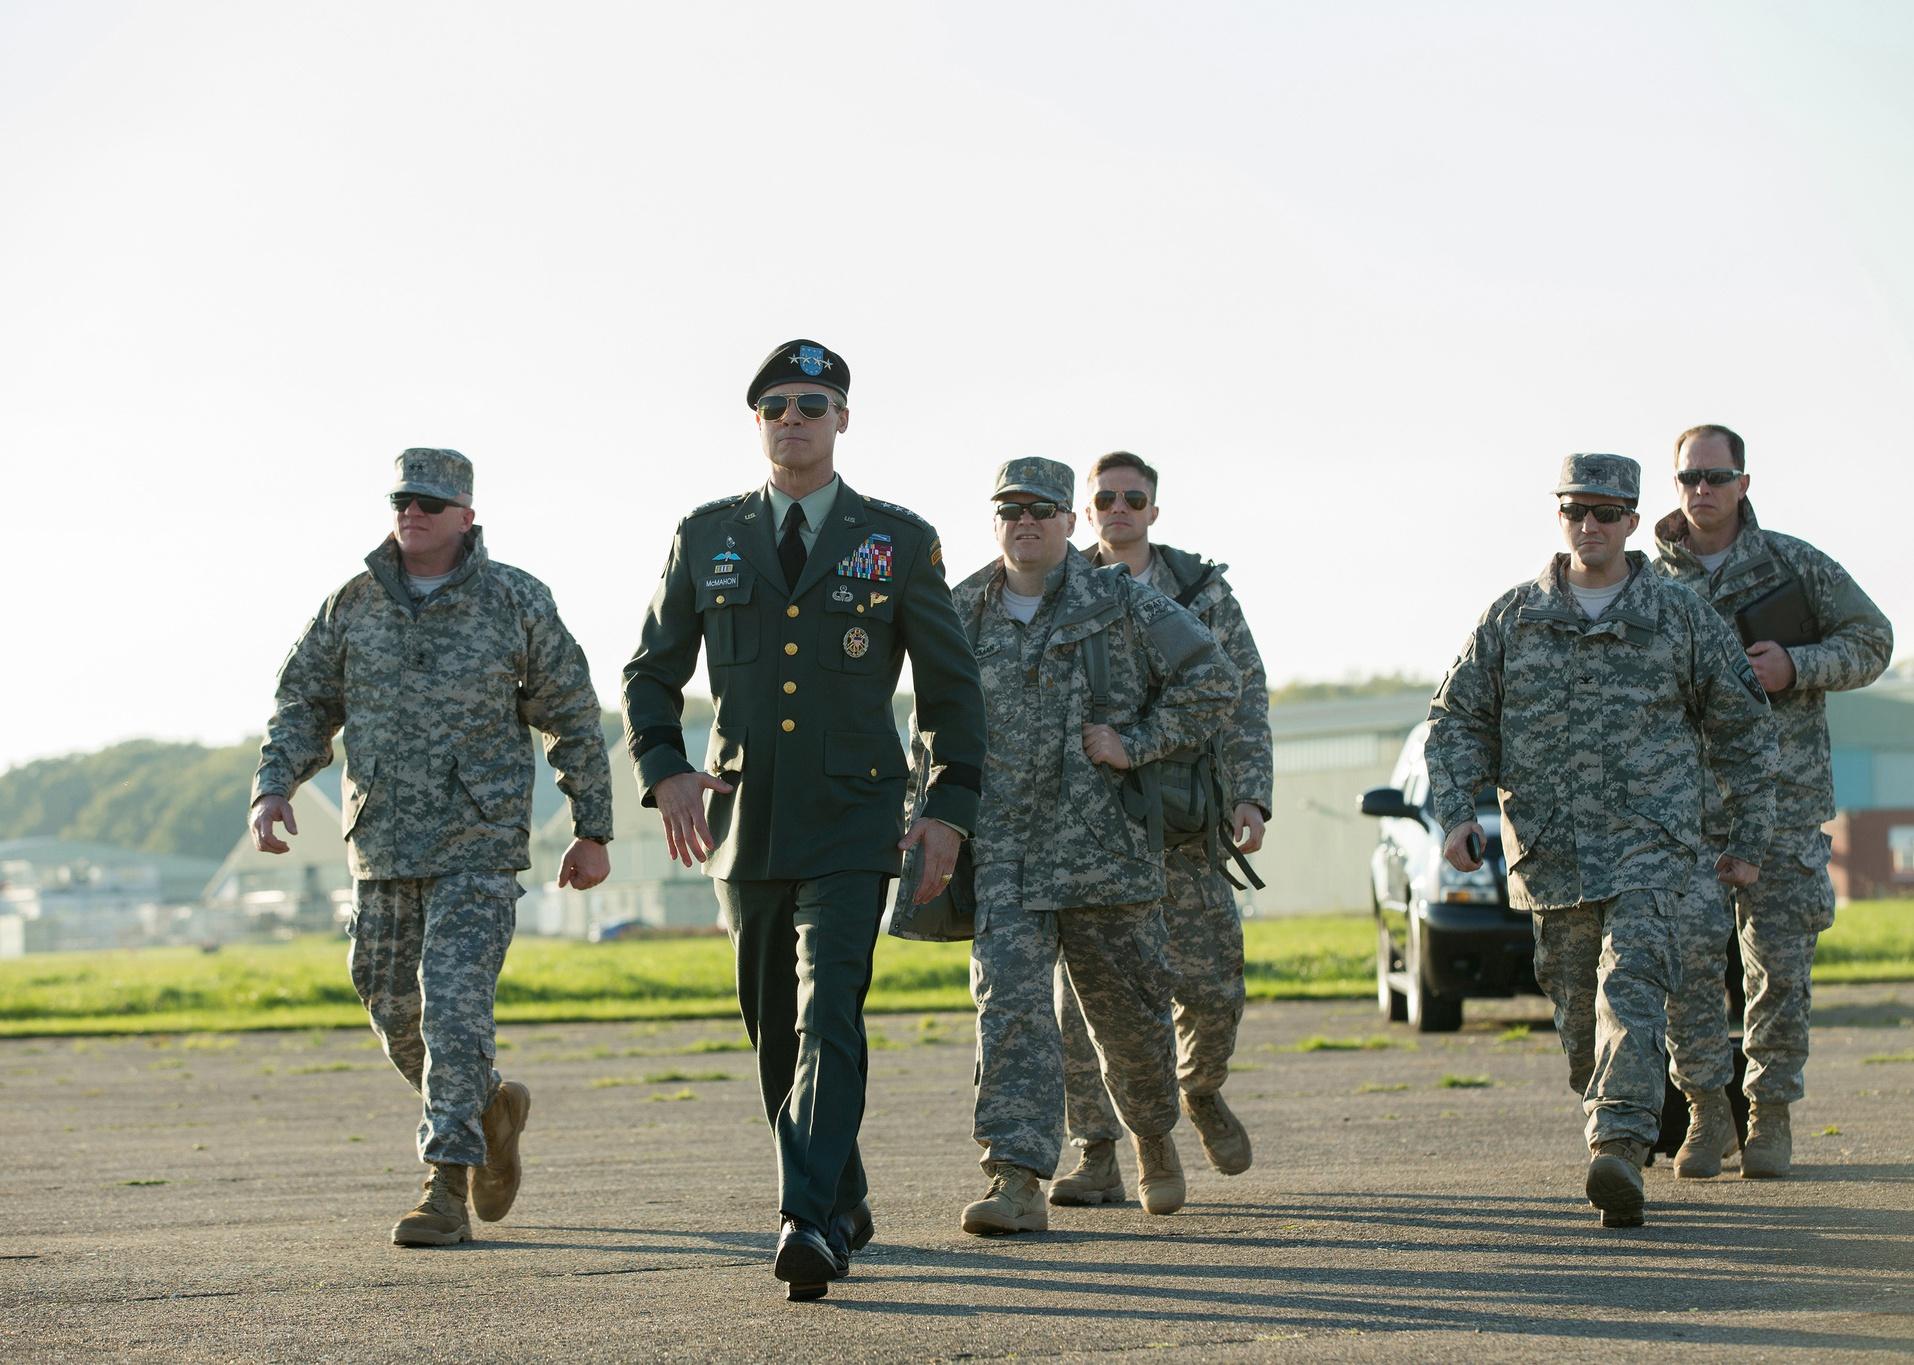 Brad Pitt, in uniform, with Anthony Michael Hall, Daniel Betts, Topher Grace, Anthony Hayes, and John Magaro walking behind him in fatigues. 